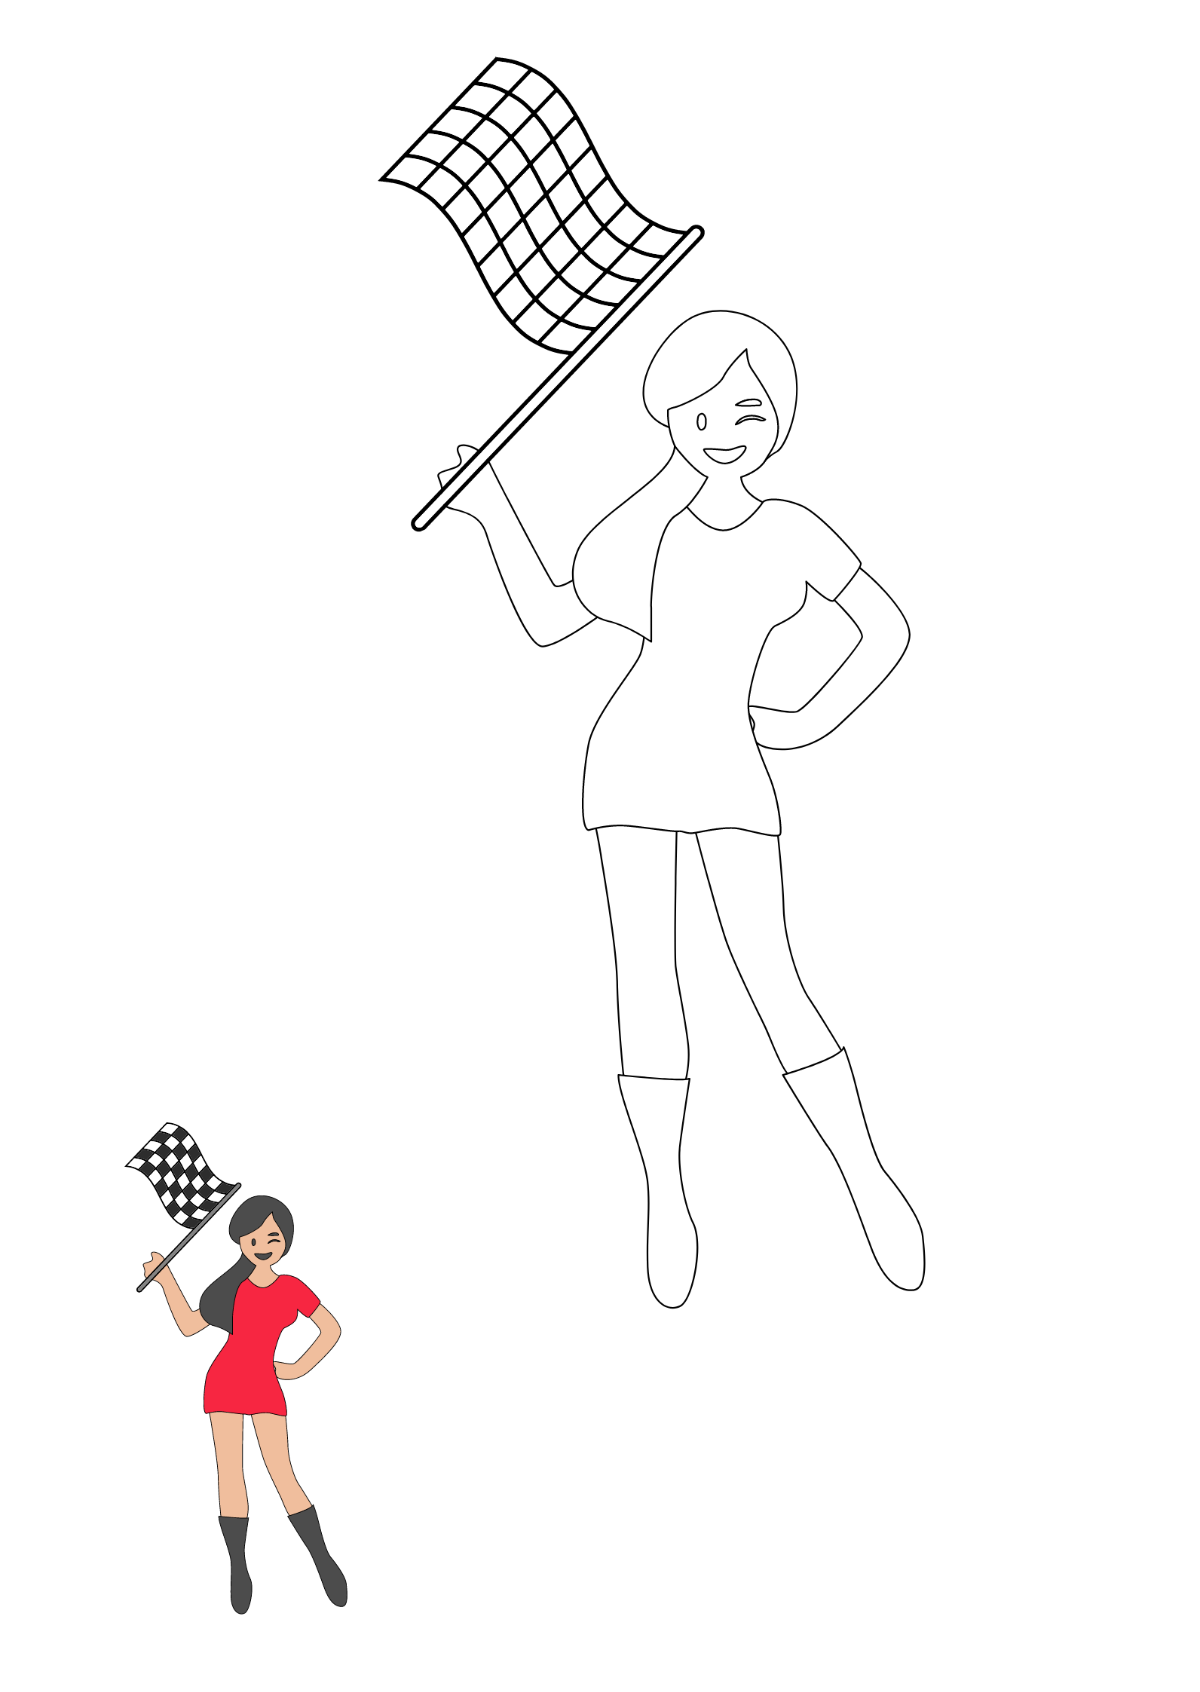 Checkered Flag Girl coloring page